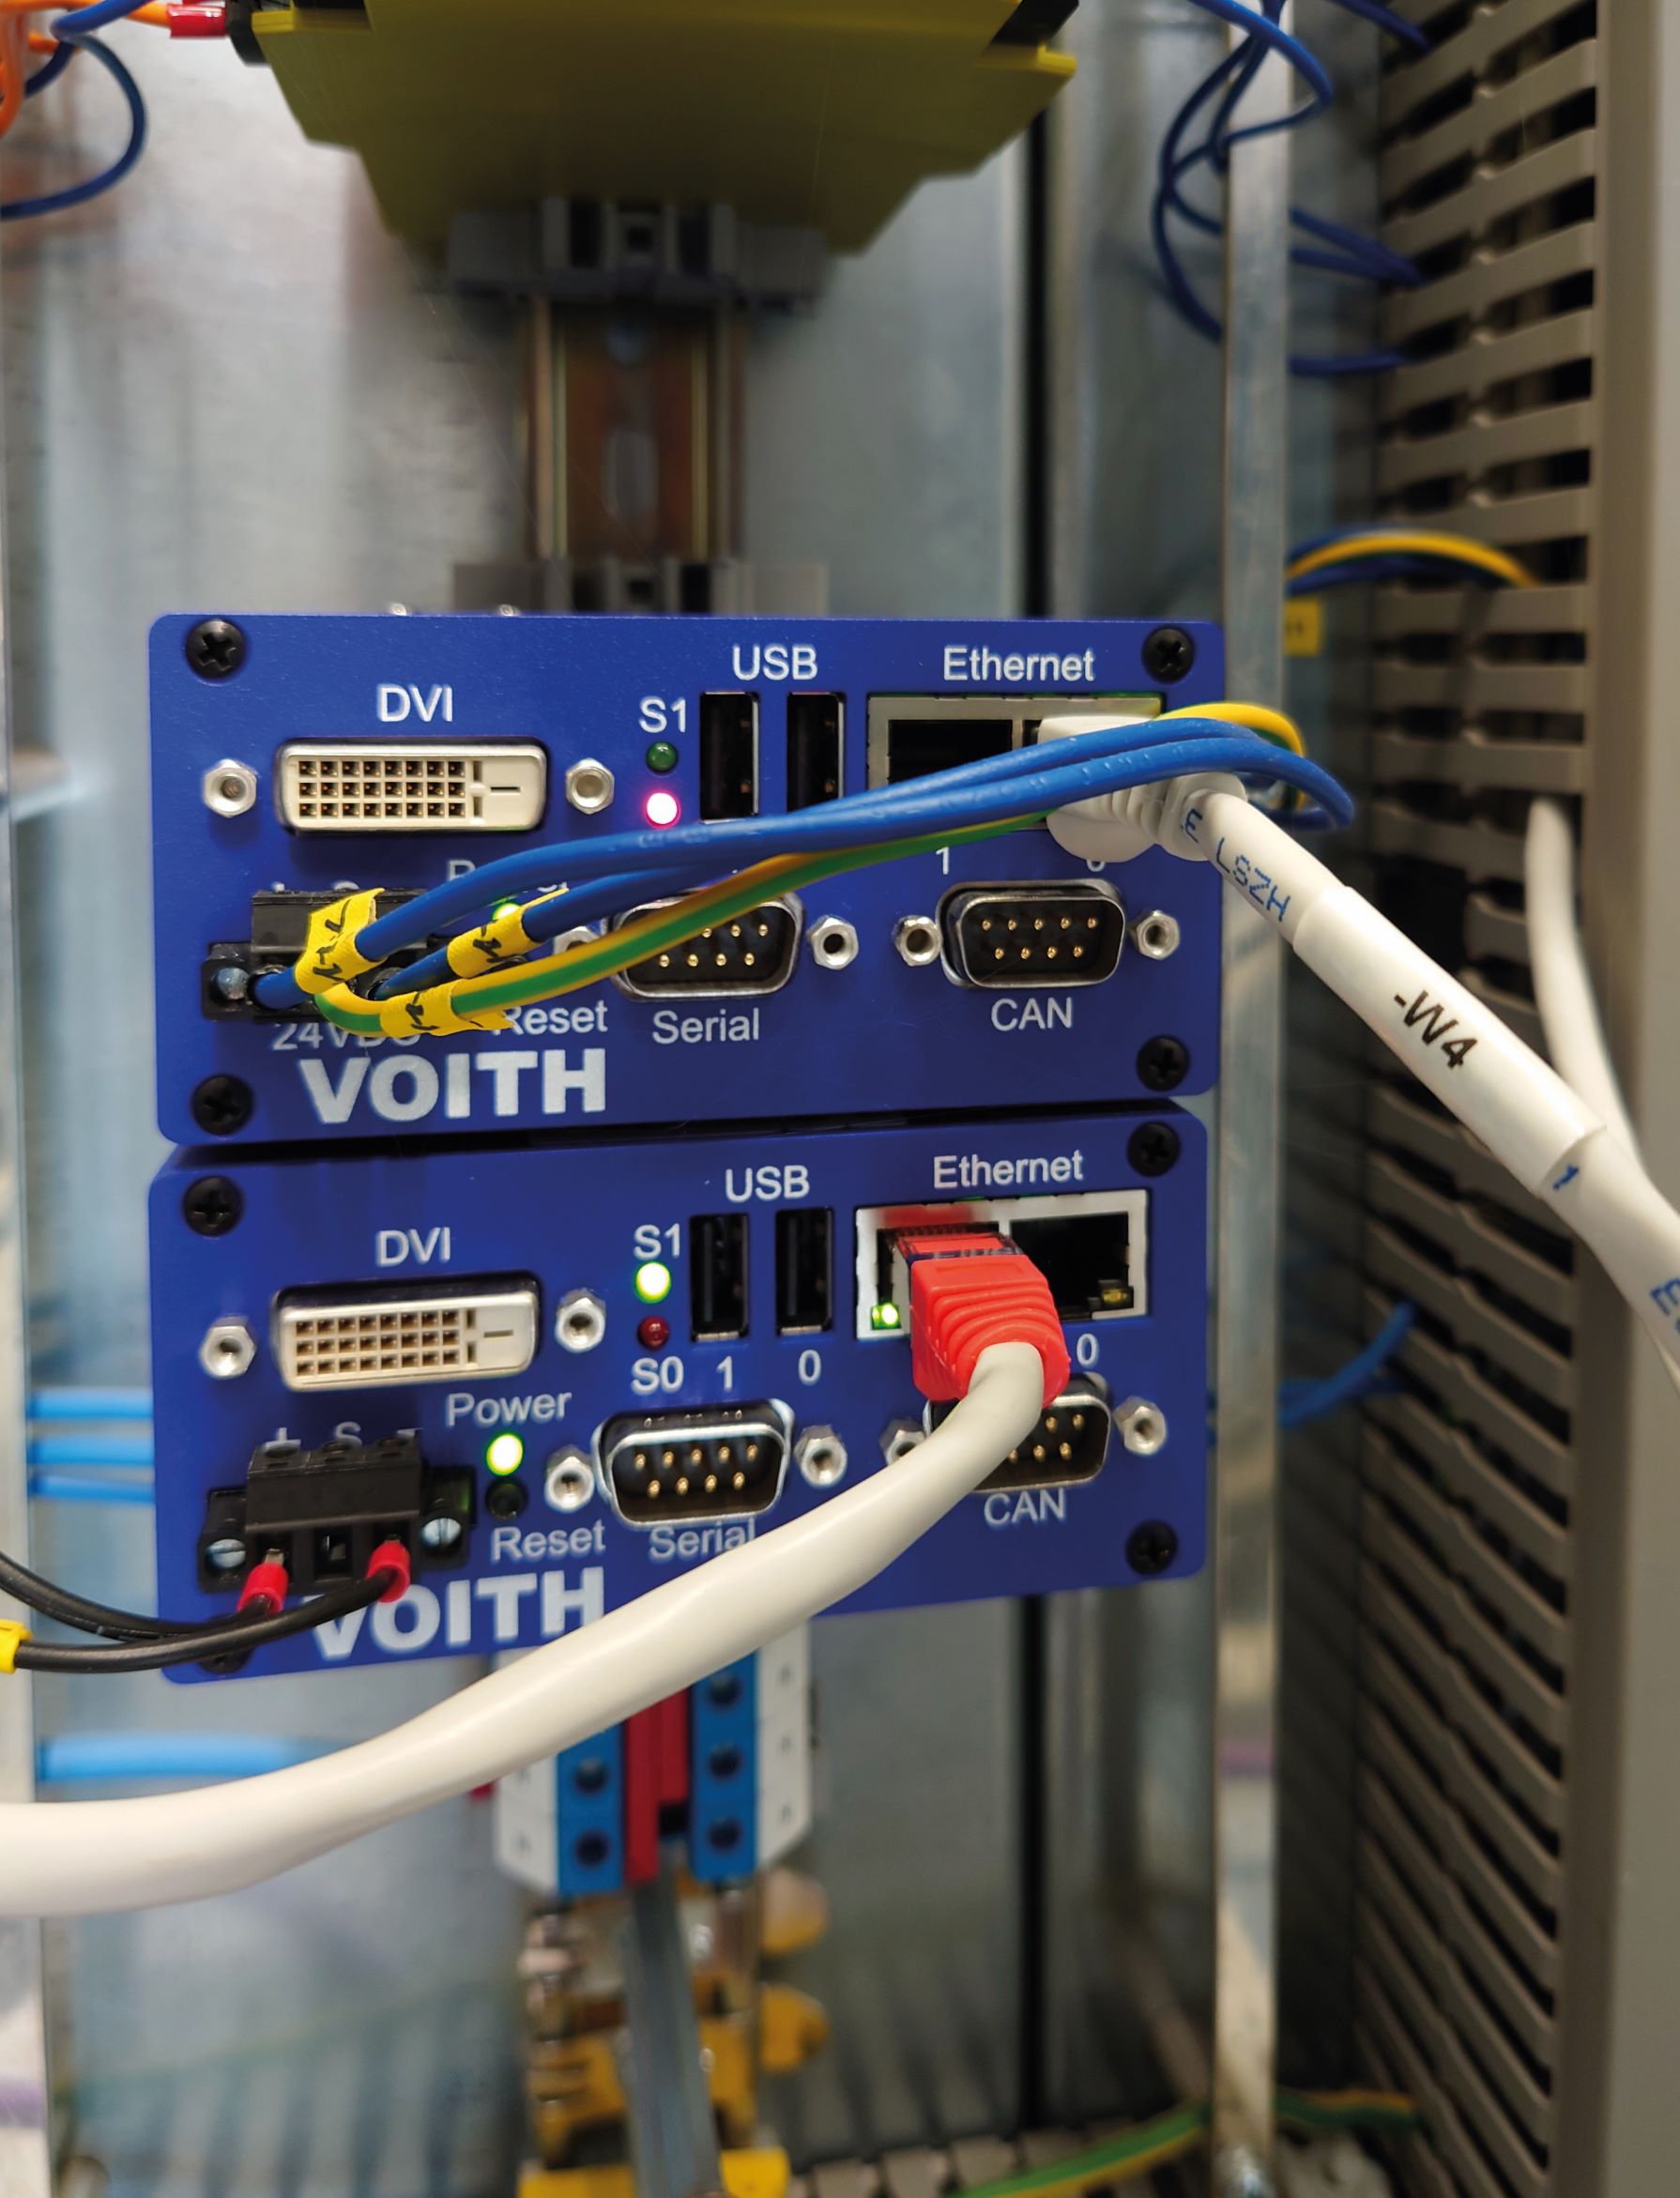 The starter kit includes the hardware to be installed at site  – The configuration of the system is completed by Voith experts